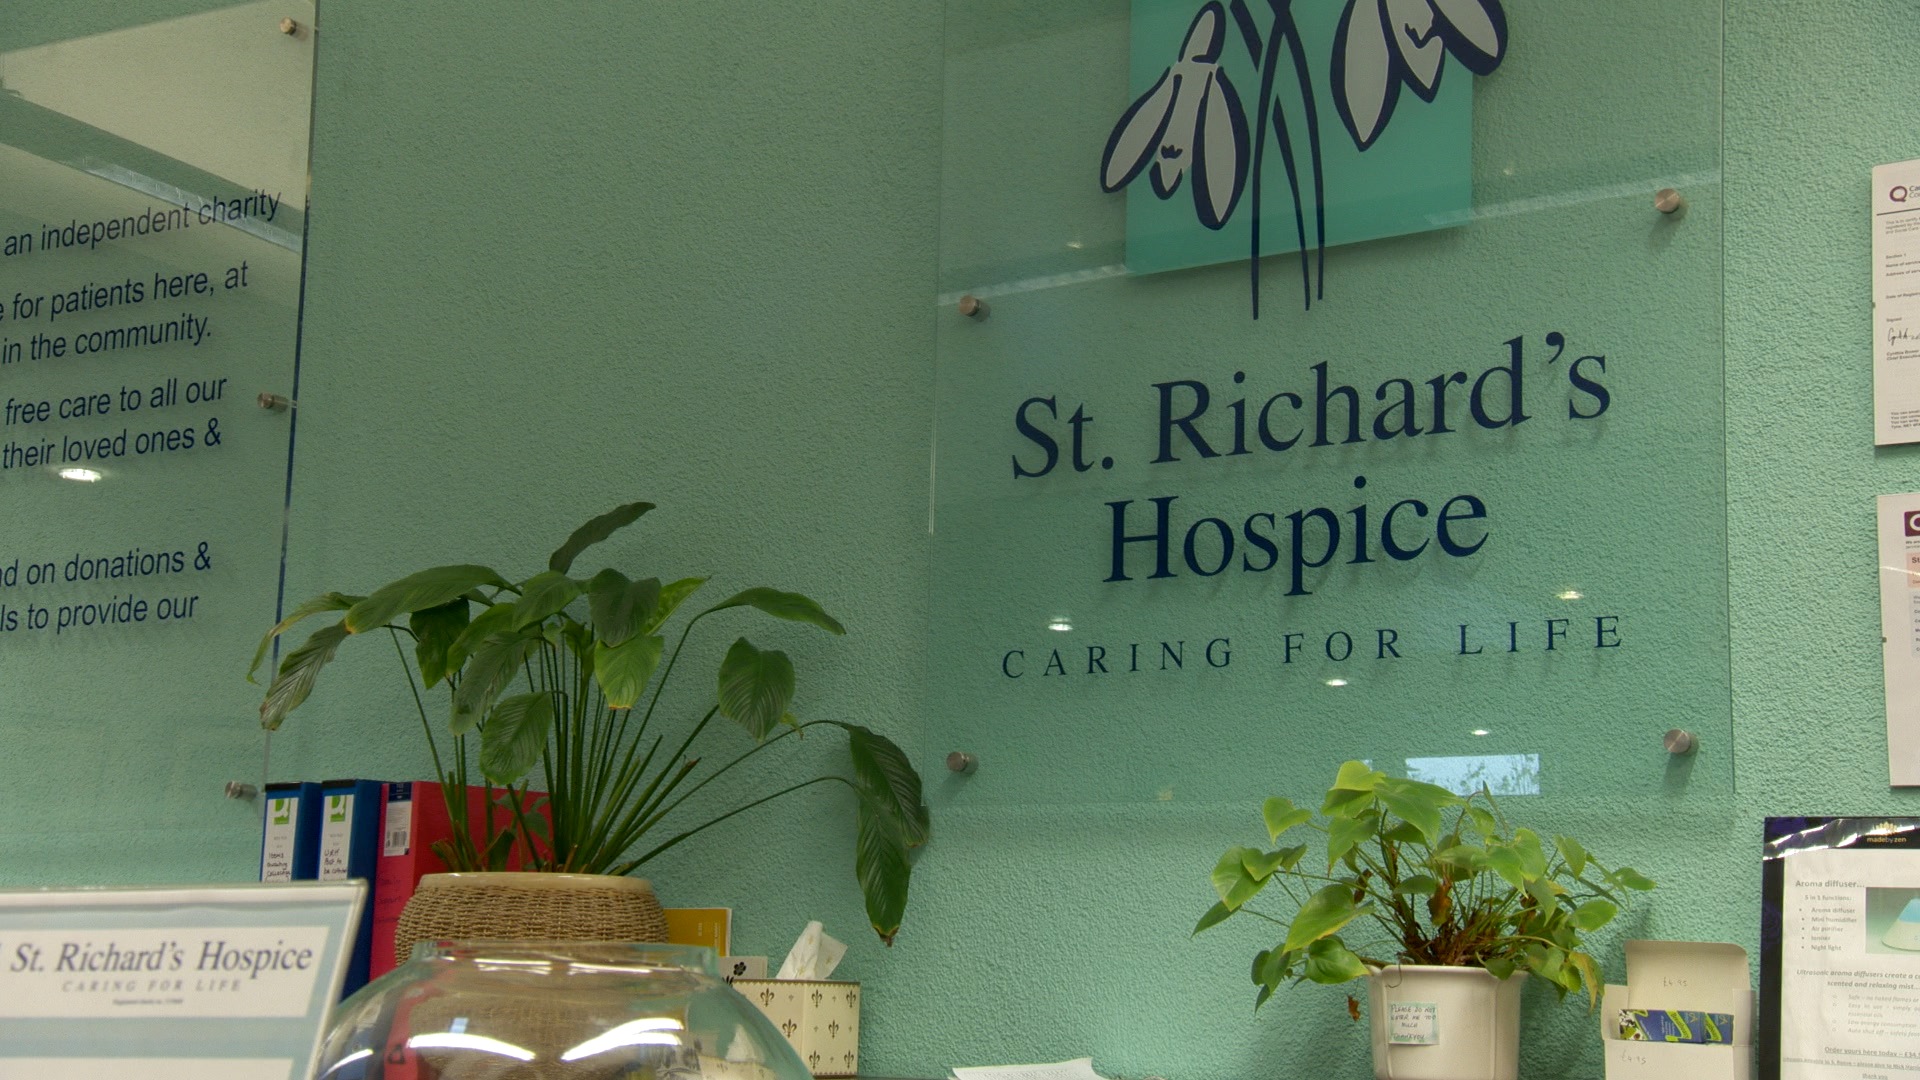 St Richard’s Hospice “Caring for Life”